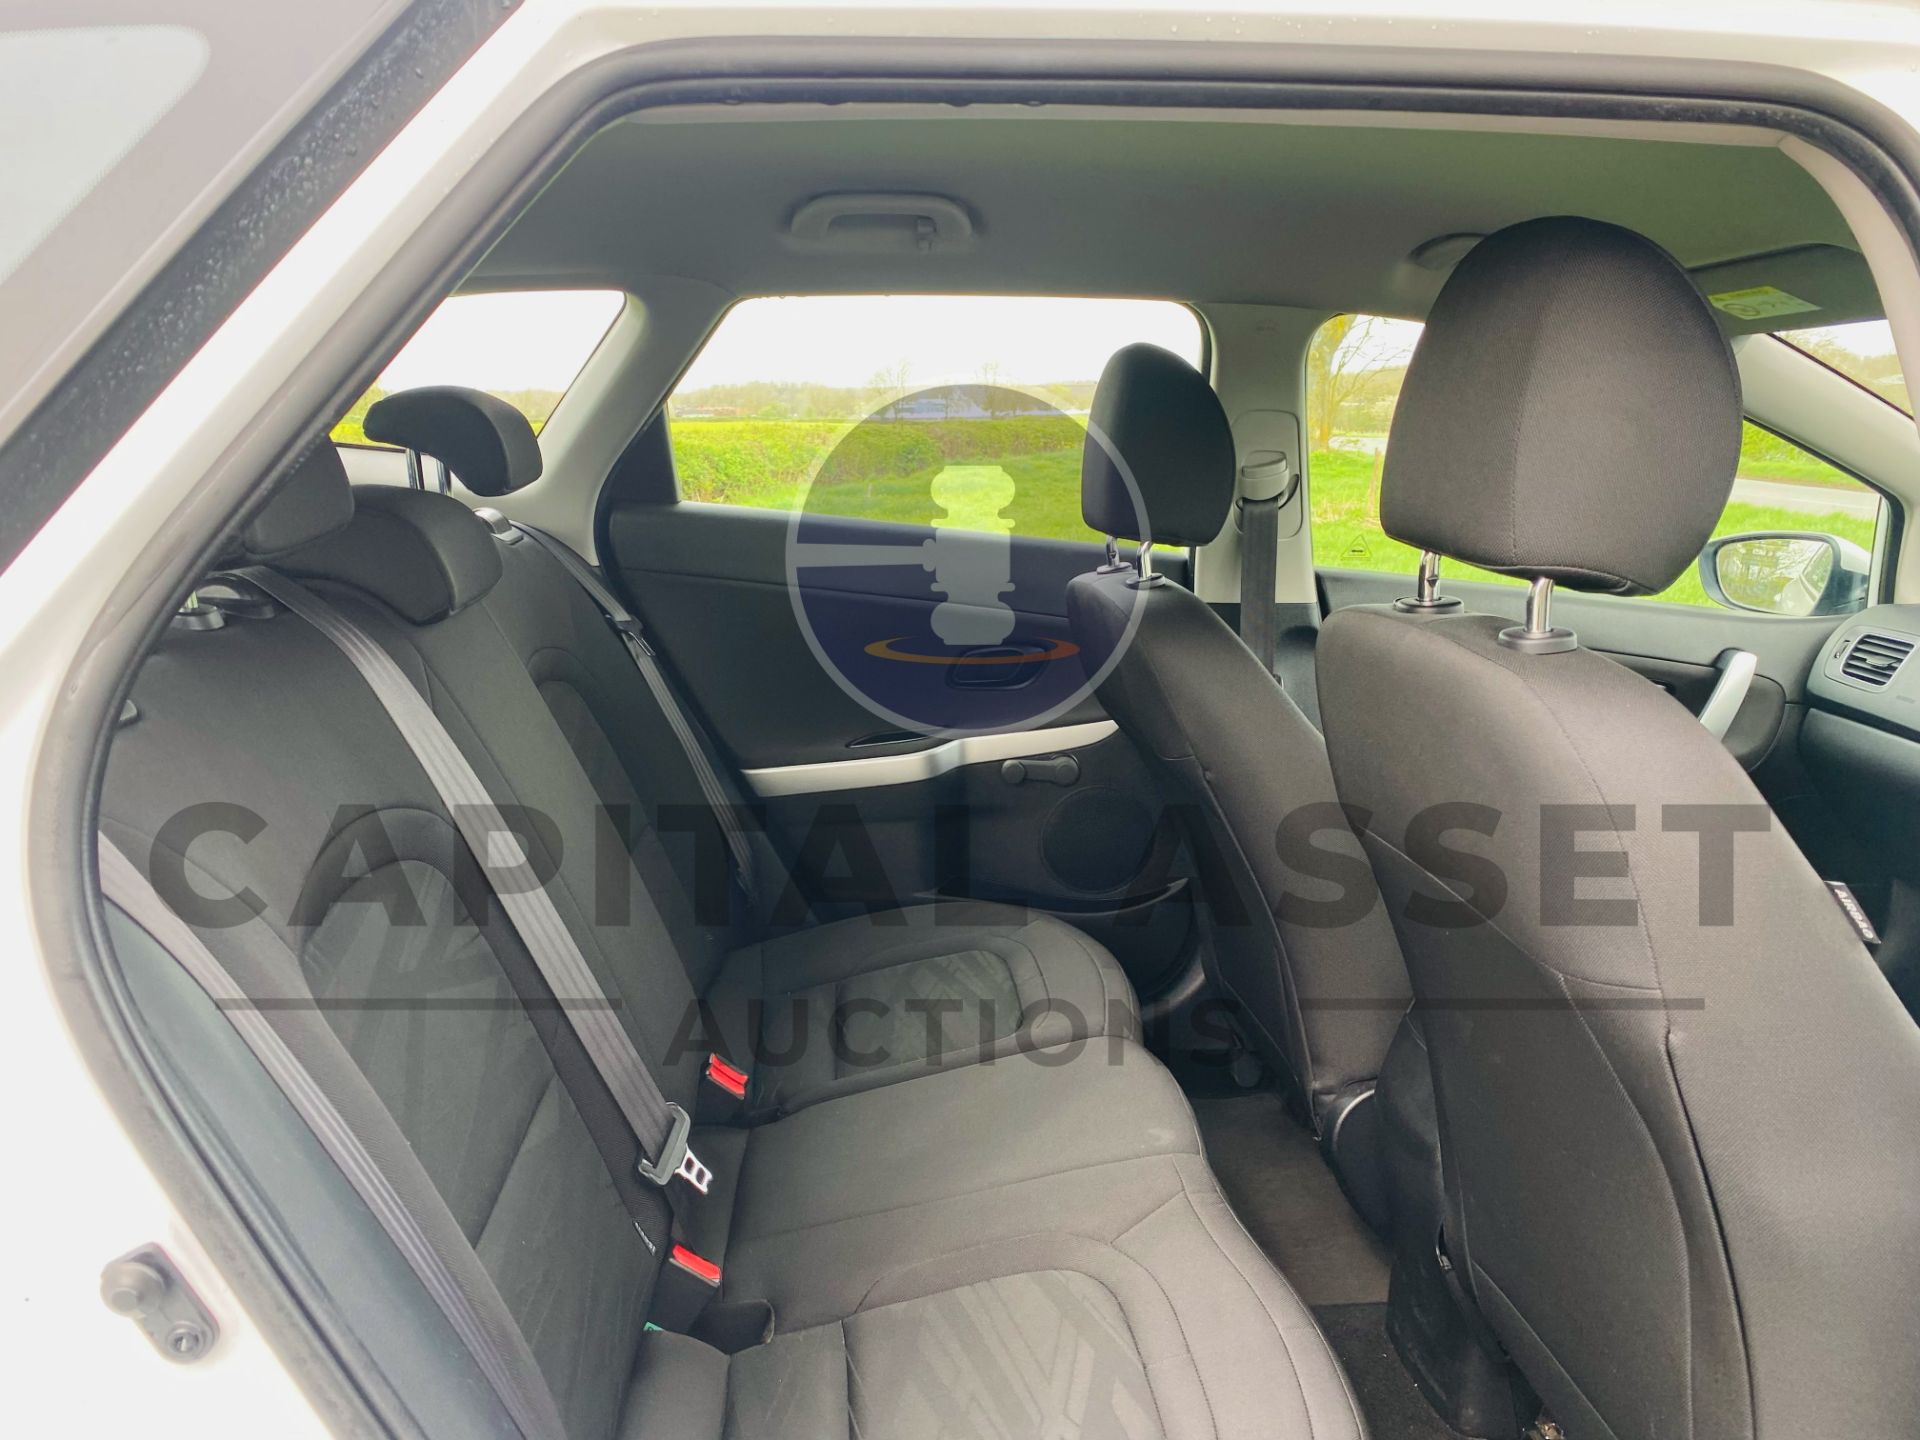 (ON SALE) KIA CEED 1.6 CRDI ISG 1 ESTATE- 18 REG - FULL SERVICE HISTORY - AIR CONDITIONING - Image 26 of 27